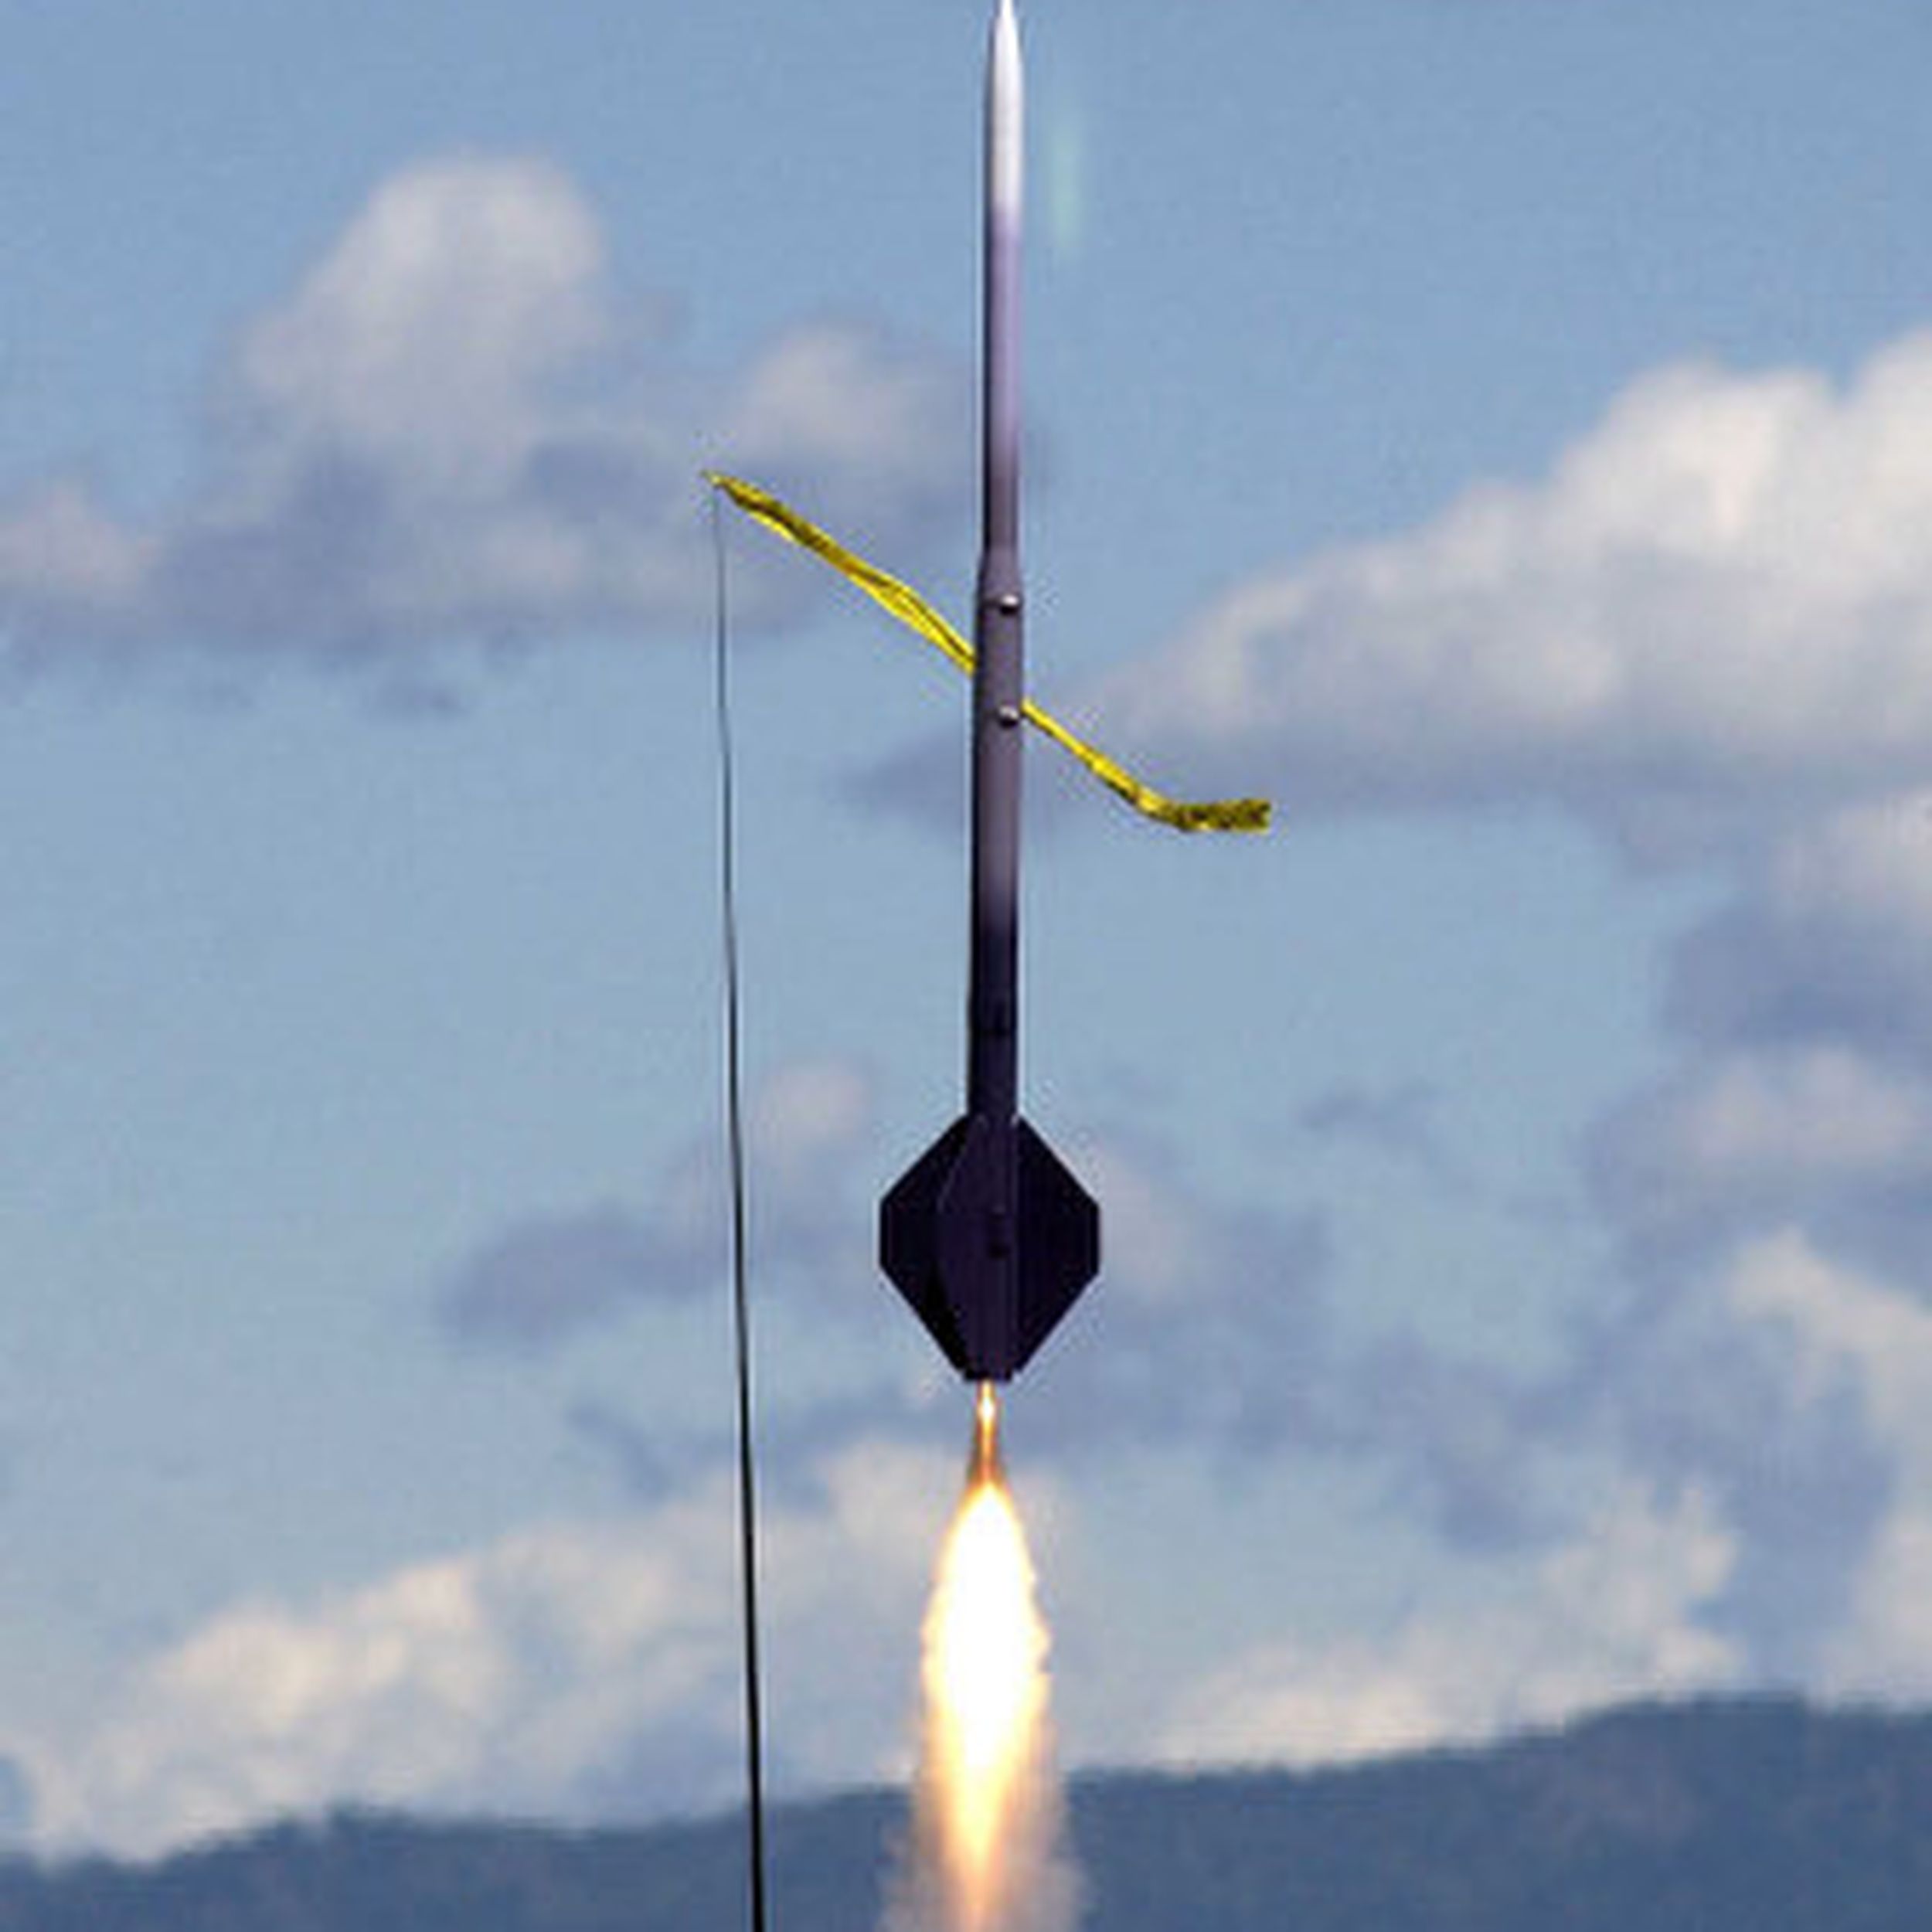 Dedicated group has rocket-powered hobby | The Spokesman-Review